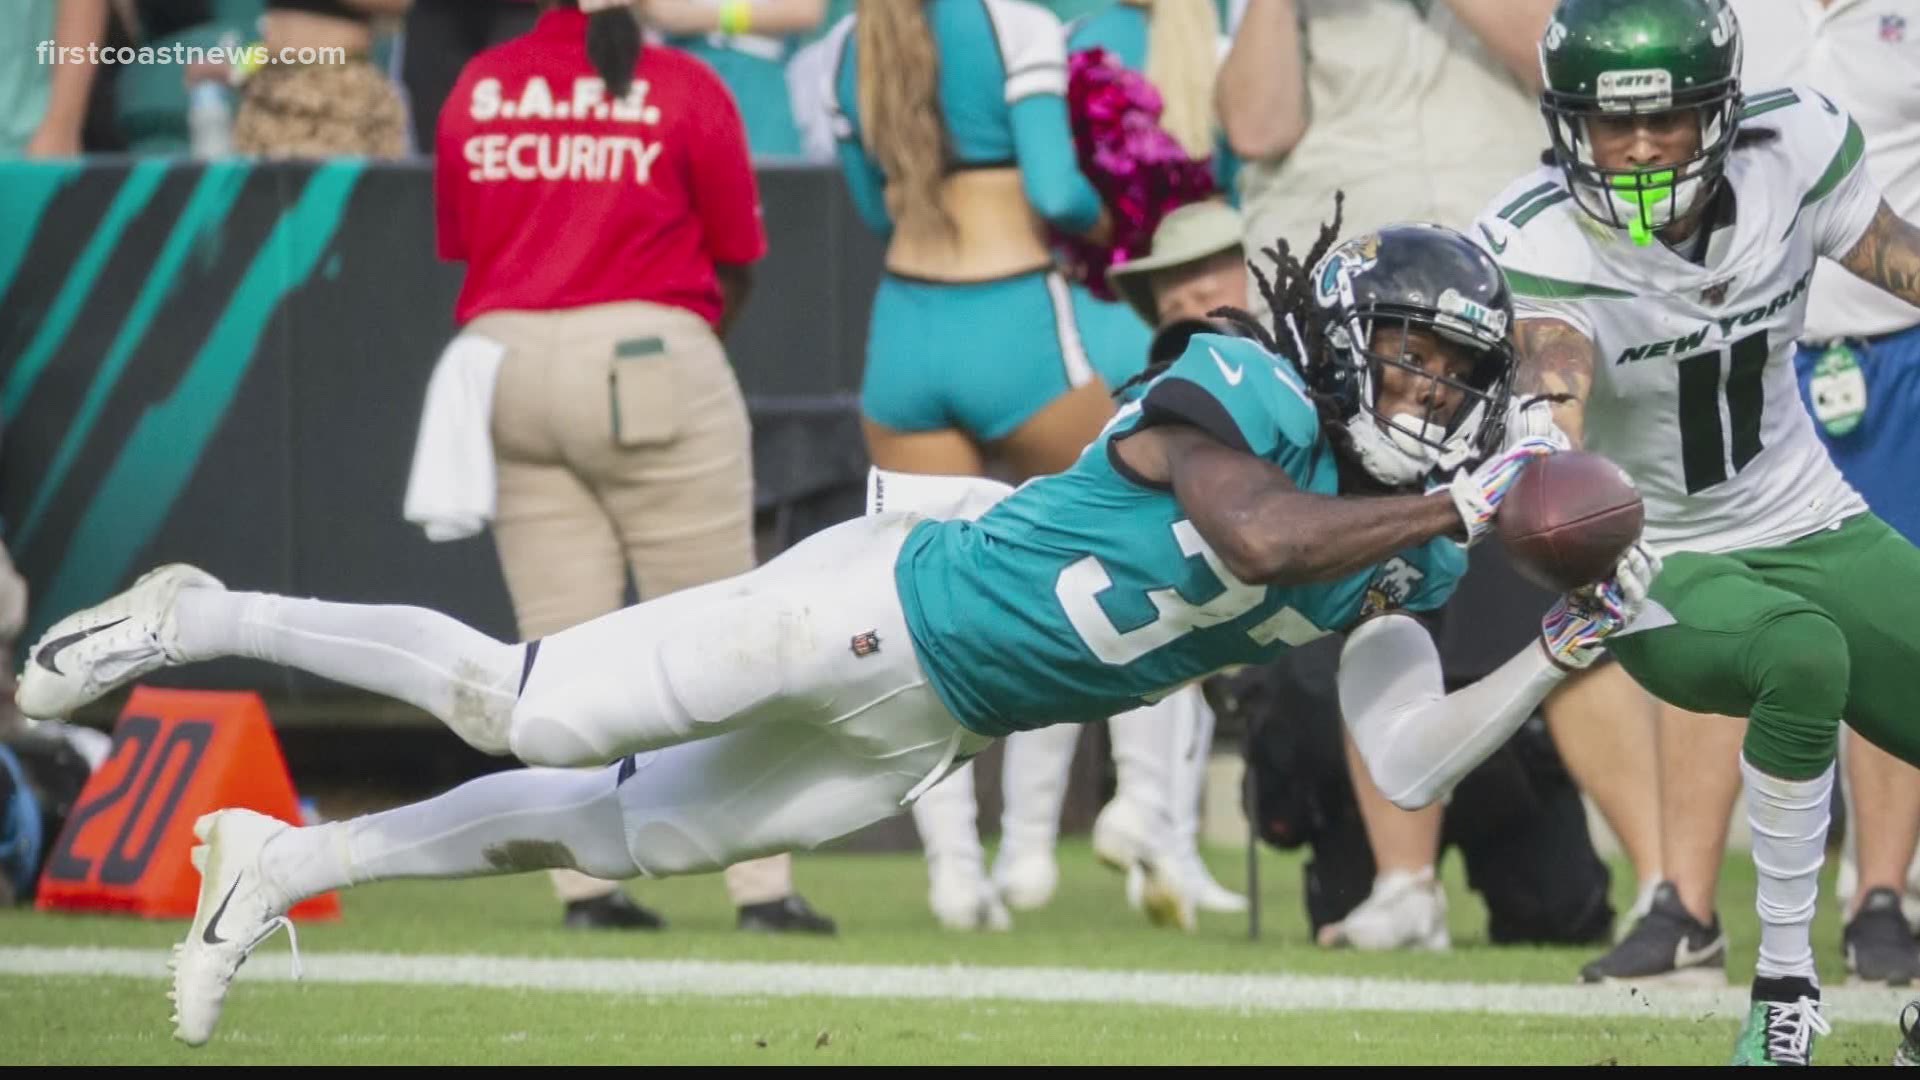 Ben Murphy breaks down the top story lines heading into Jaguars Training Camp 2020.